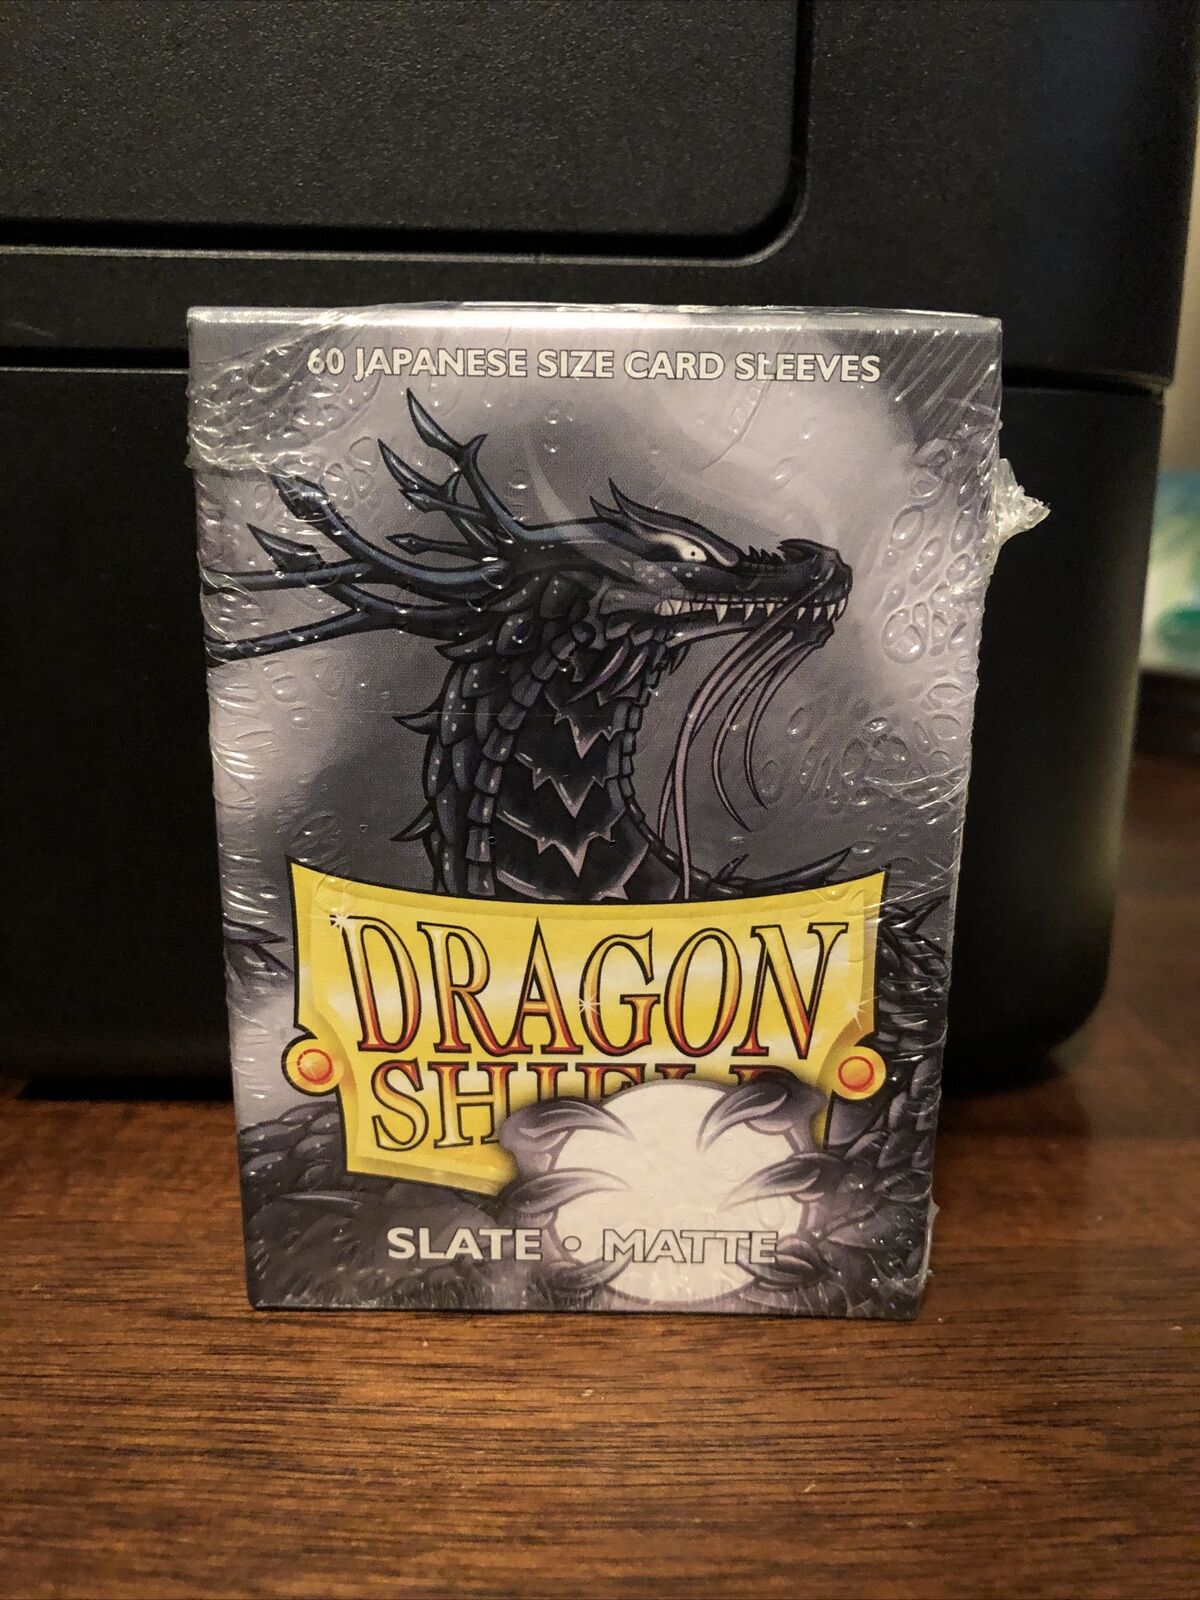 Dragon Shield Sleeves Pack of 60 Japanese Size Card Sleeves SLATE Matte